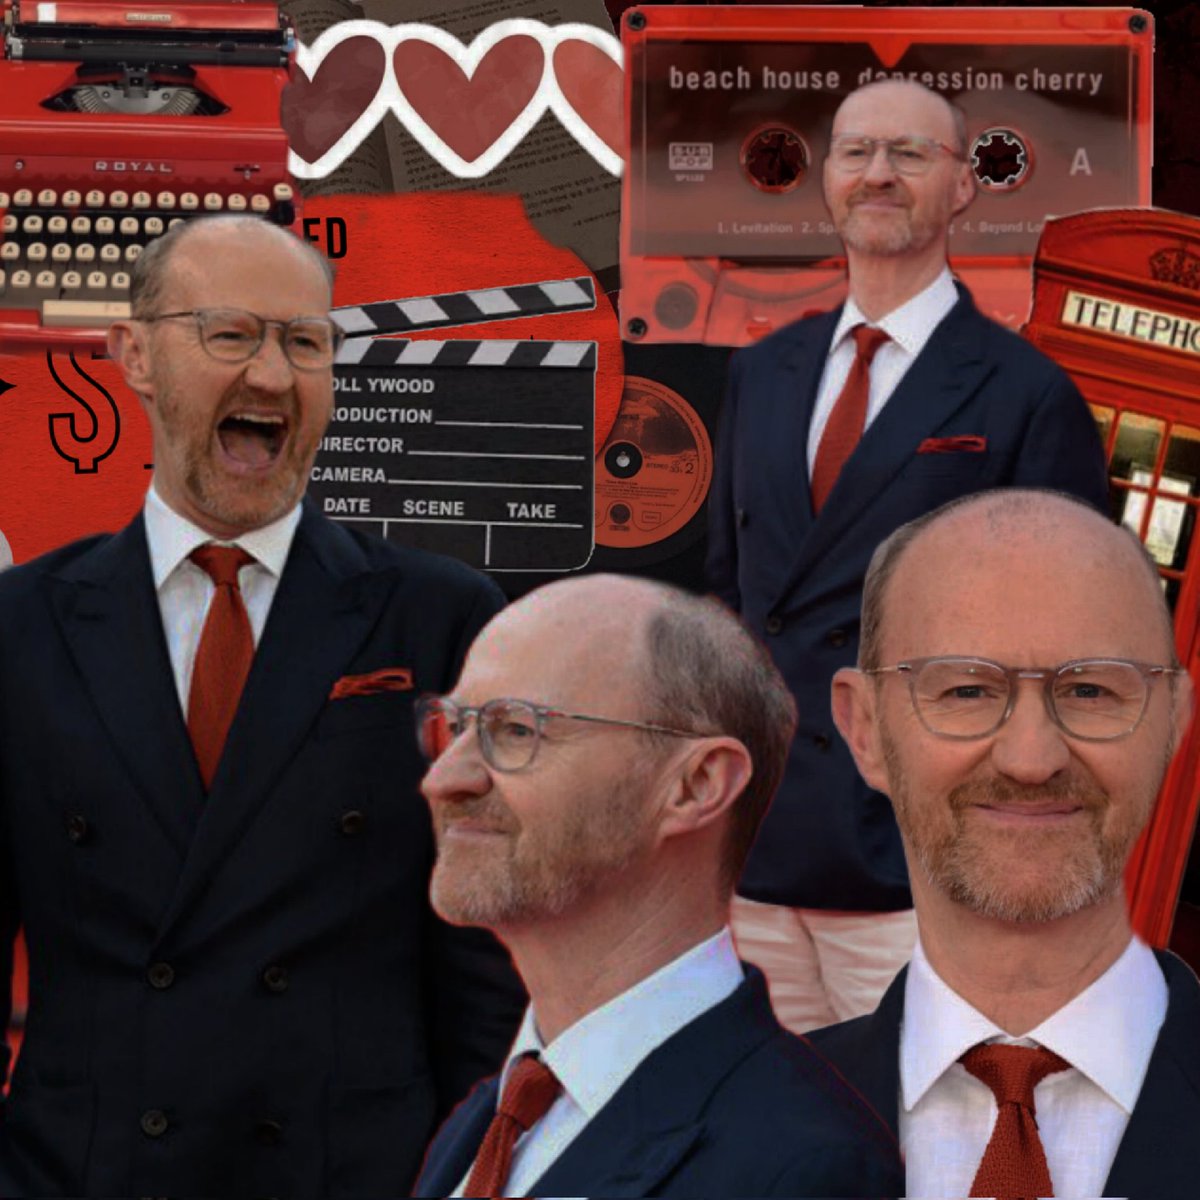 I screamed with happiness when I saw the new photos😭❤
#MARK #gatiss #markgatiss